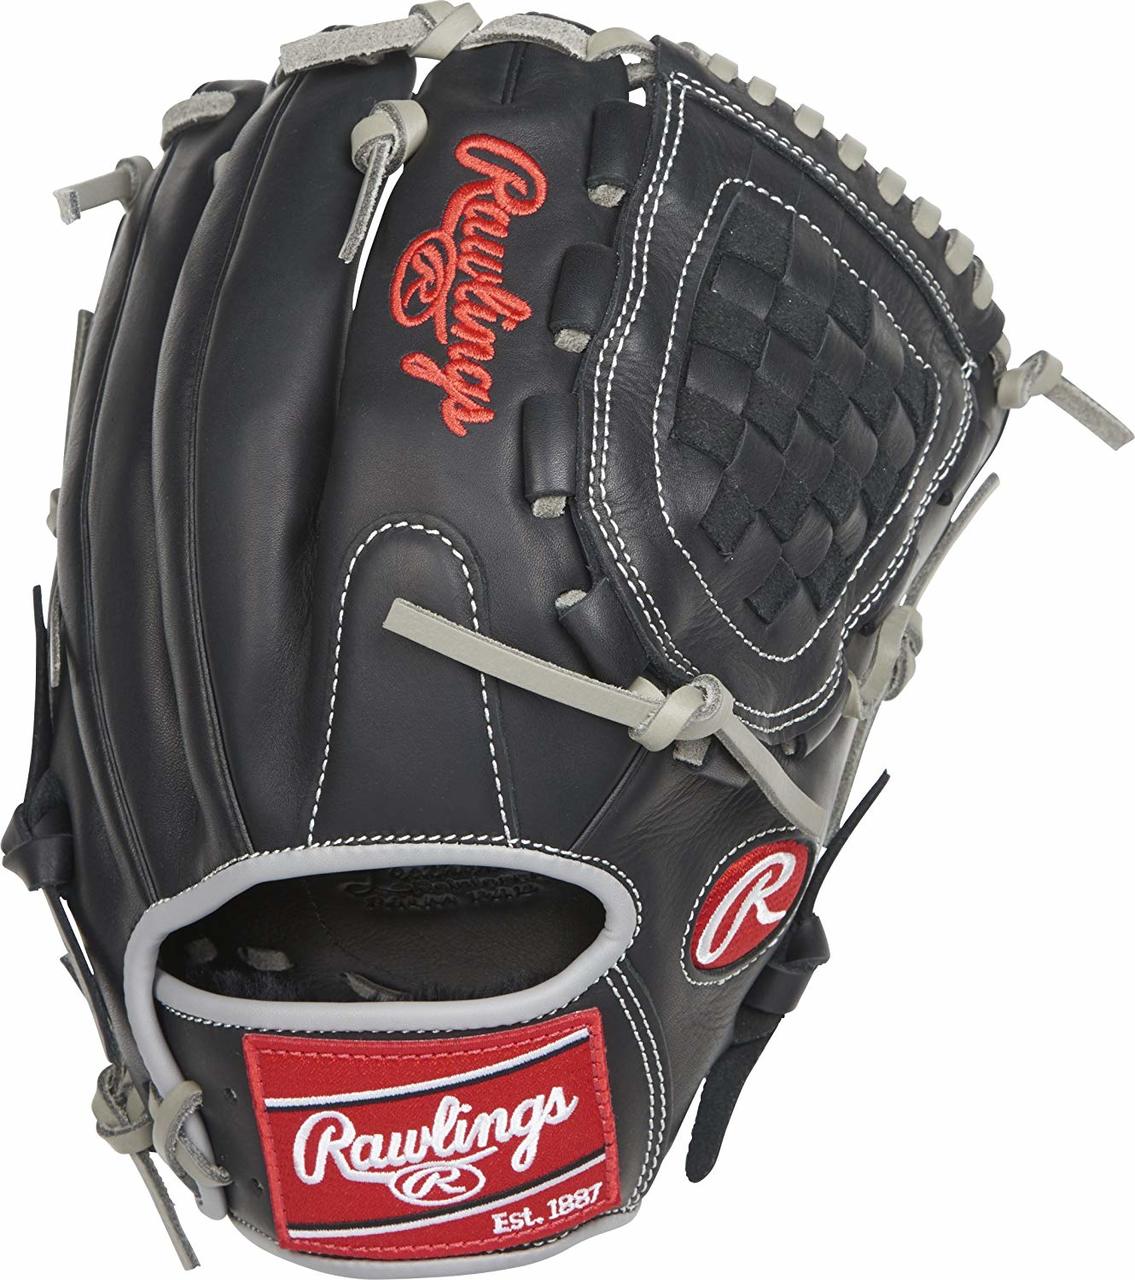 rawlings-gamer-series-baseball-glove-g205-3bg-right-hand-throw G205-3BG-RightHandThrow Rawlings 083321376450 11-3/4-inch all-leather mens Baseball glove Tennessee tanning rawhide leather laces for